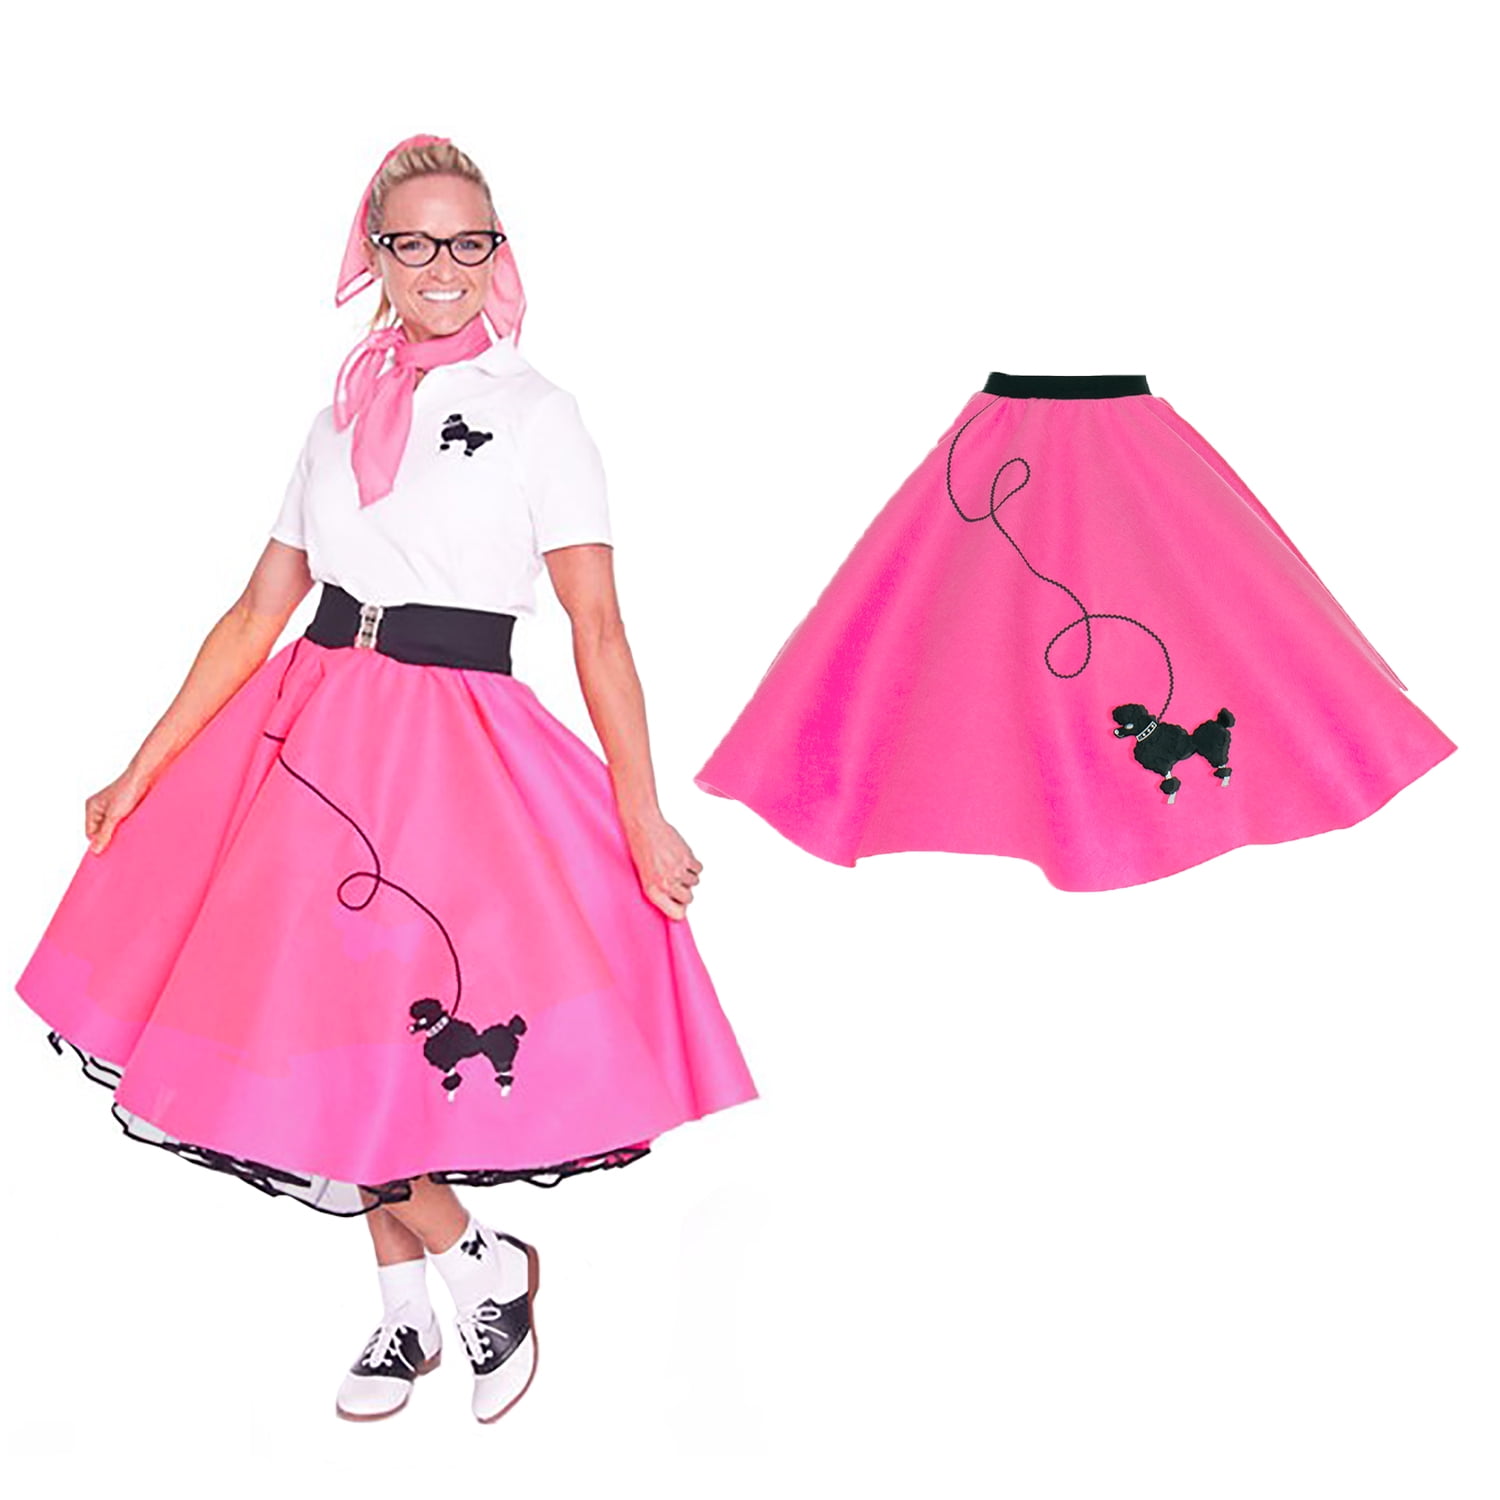 Adult Plus Size - 50's Poodle Skirt Women Costume Handmade in the USA - Hot  Pink 3X/4X 